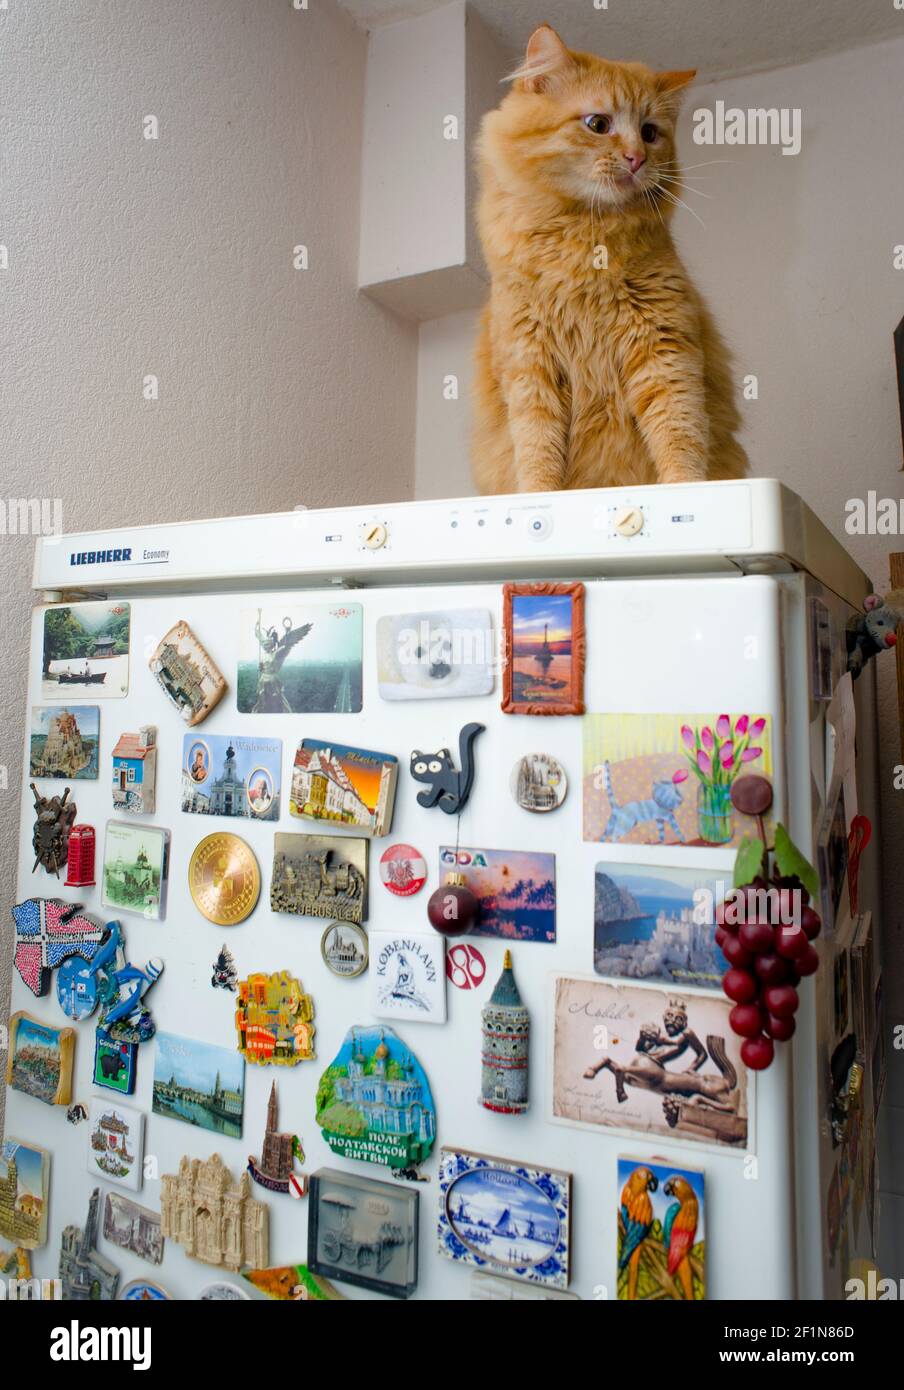 Fluffy red cat, sitting at refrigerator, covered with souvenir magnets from various places Stock Photo